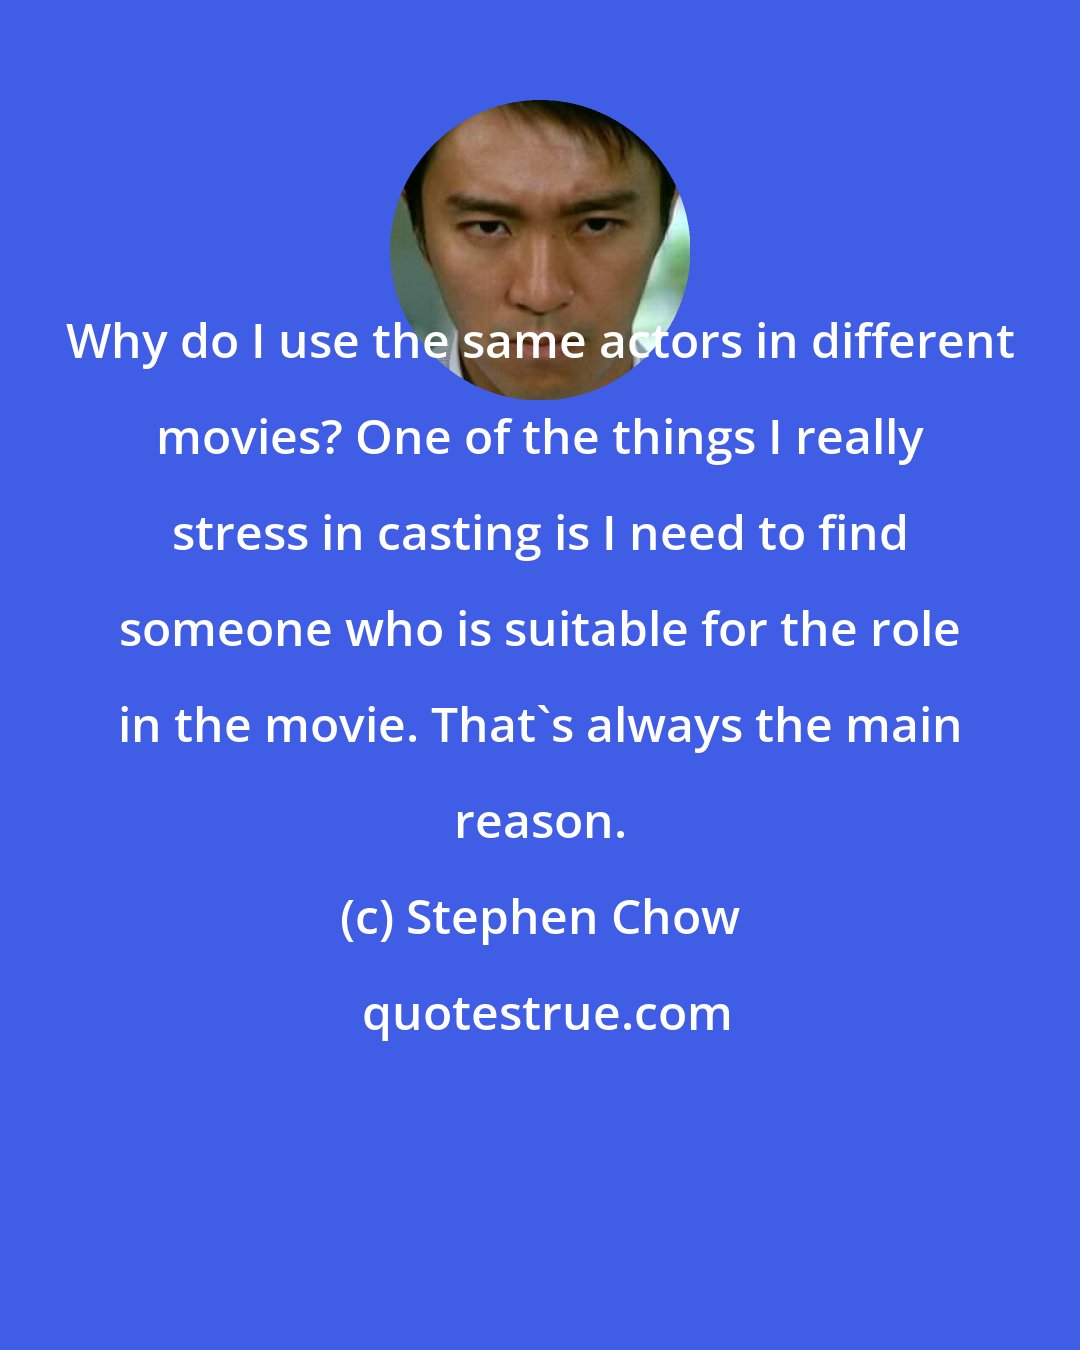 Stephen Chow: Why do I use the same actors in different movies? One of the things I really stress in casting is I need to find someone who is suitable for the role in the movie. That's always the main reason.